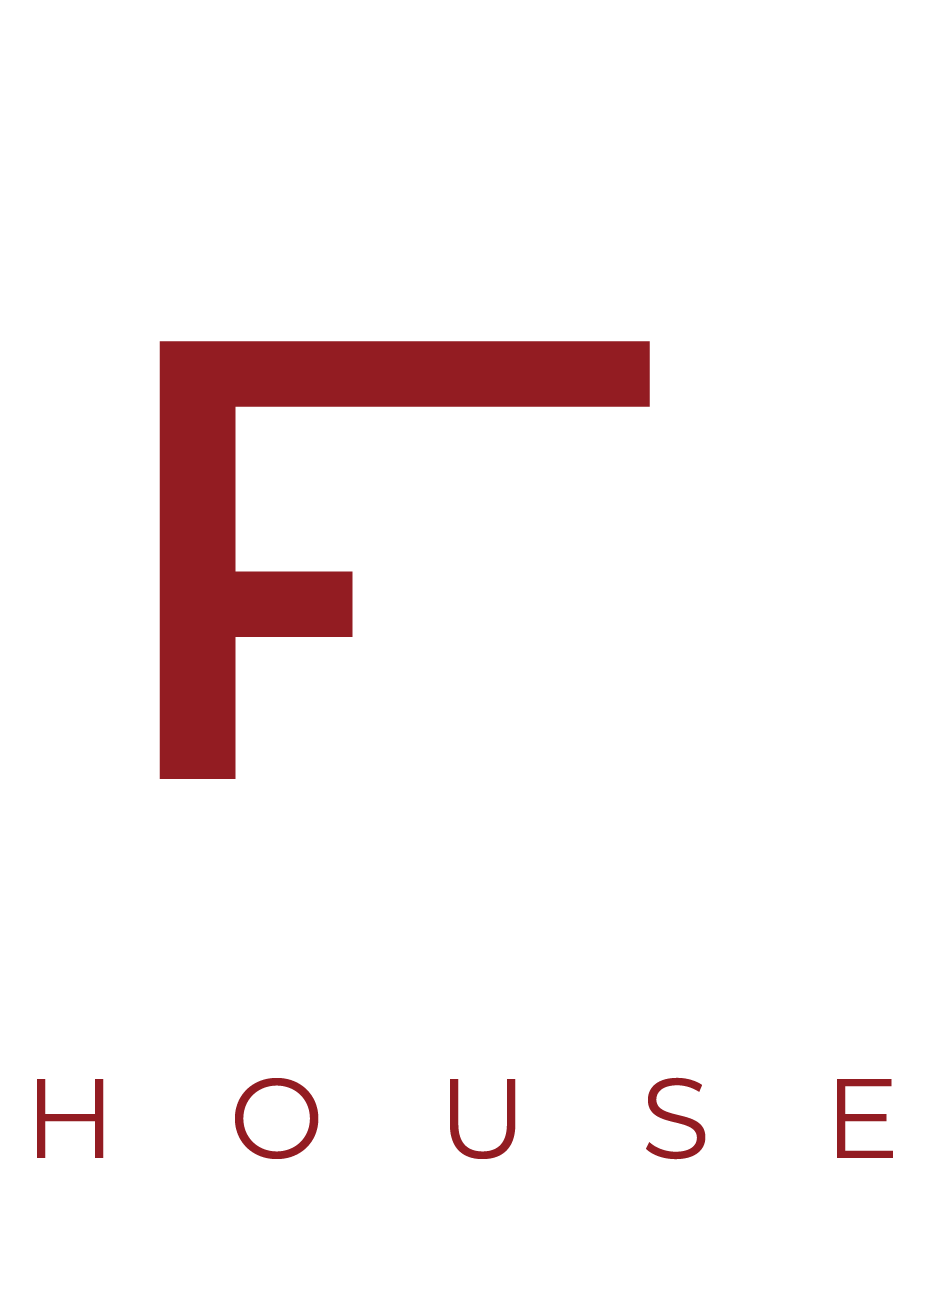 Future House | Residential Housing Solutions | Workforce Development | Community Building